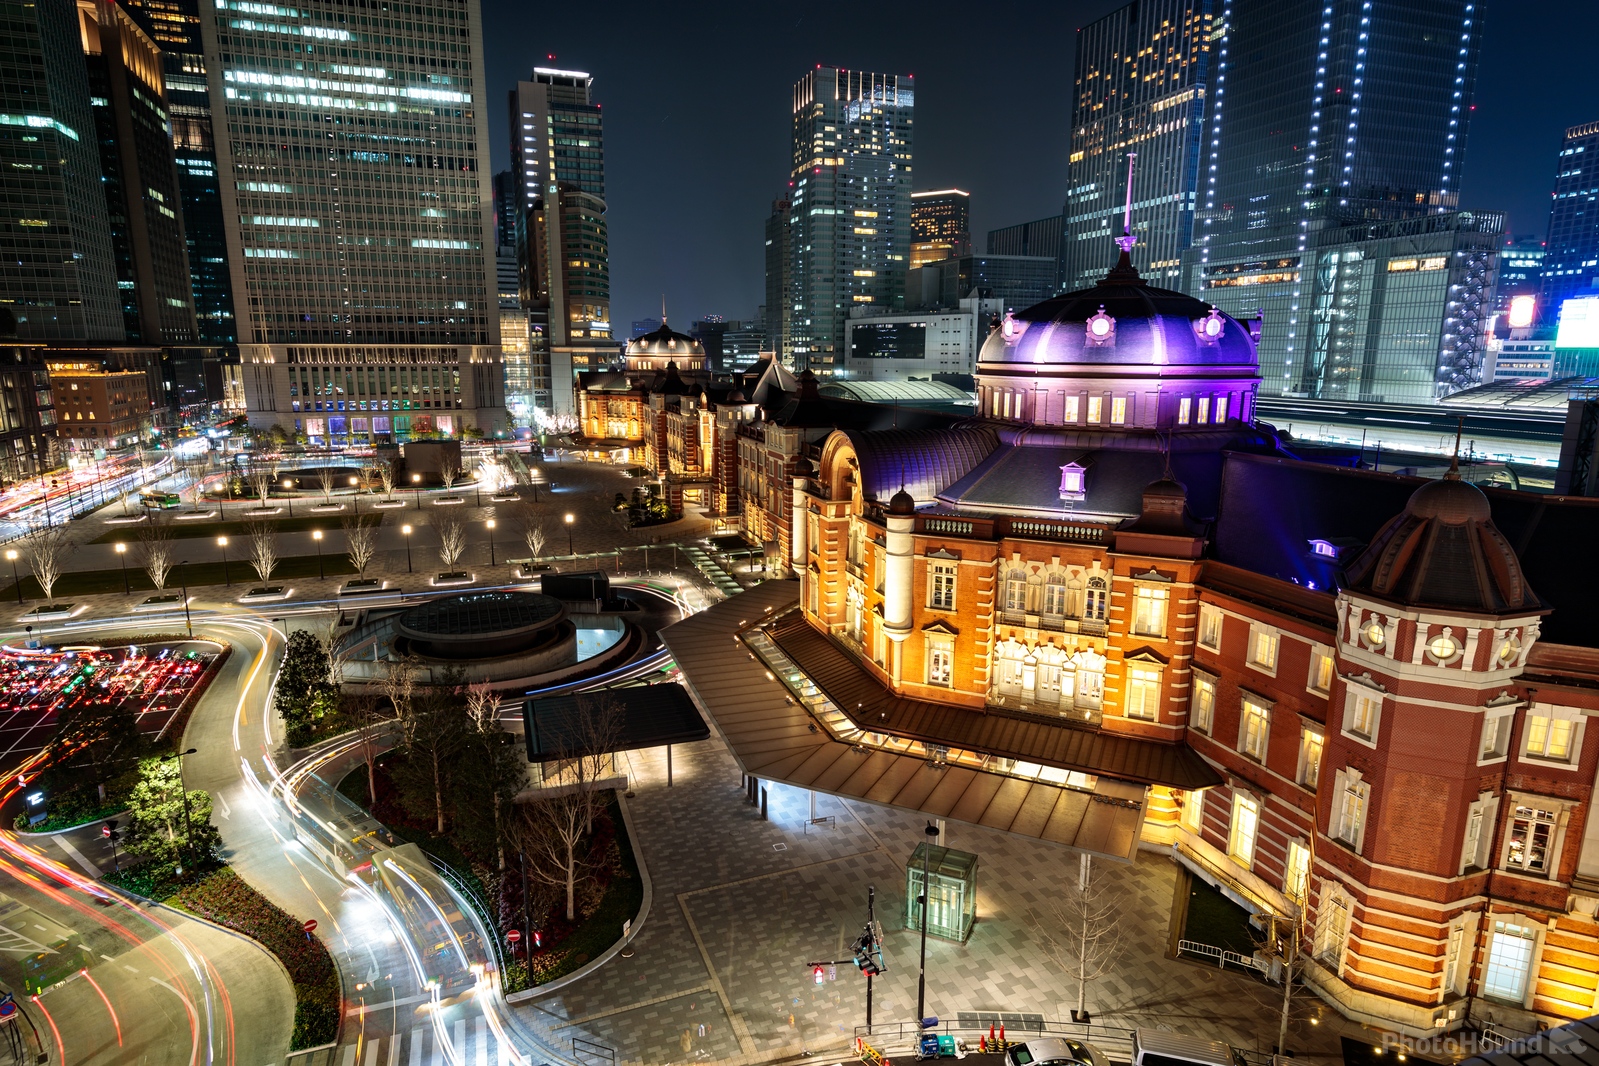 Image of Tokyo Station from KITTE Garden by Andrew Hartsell